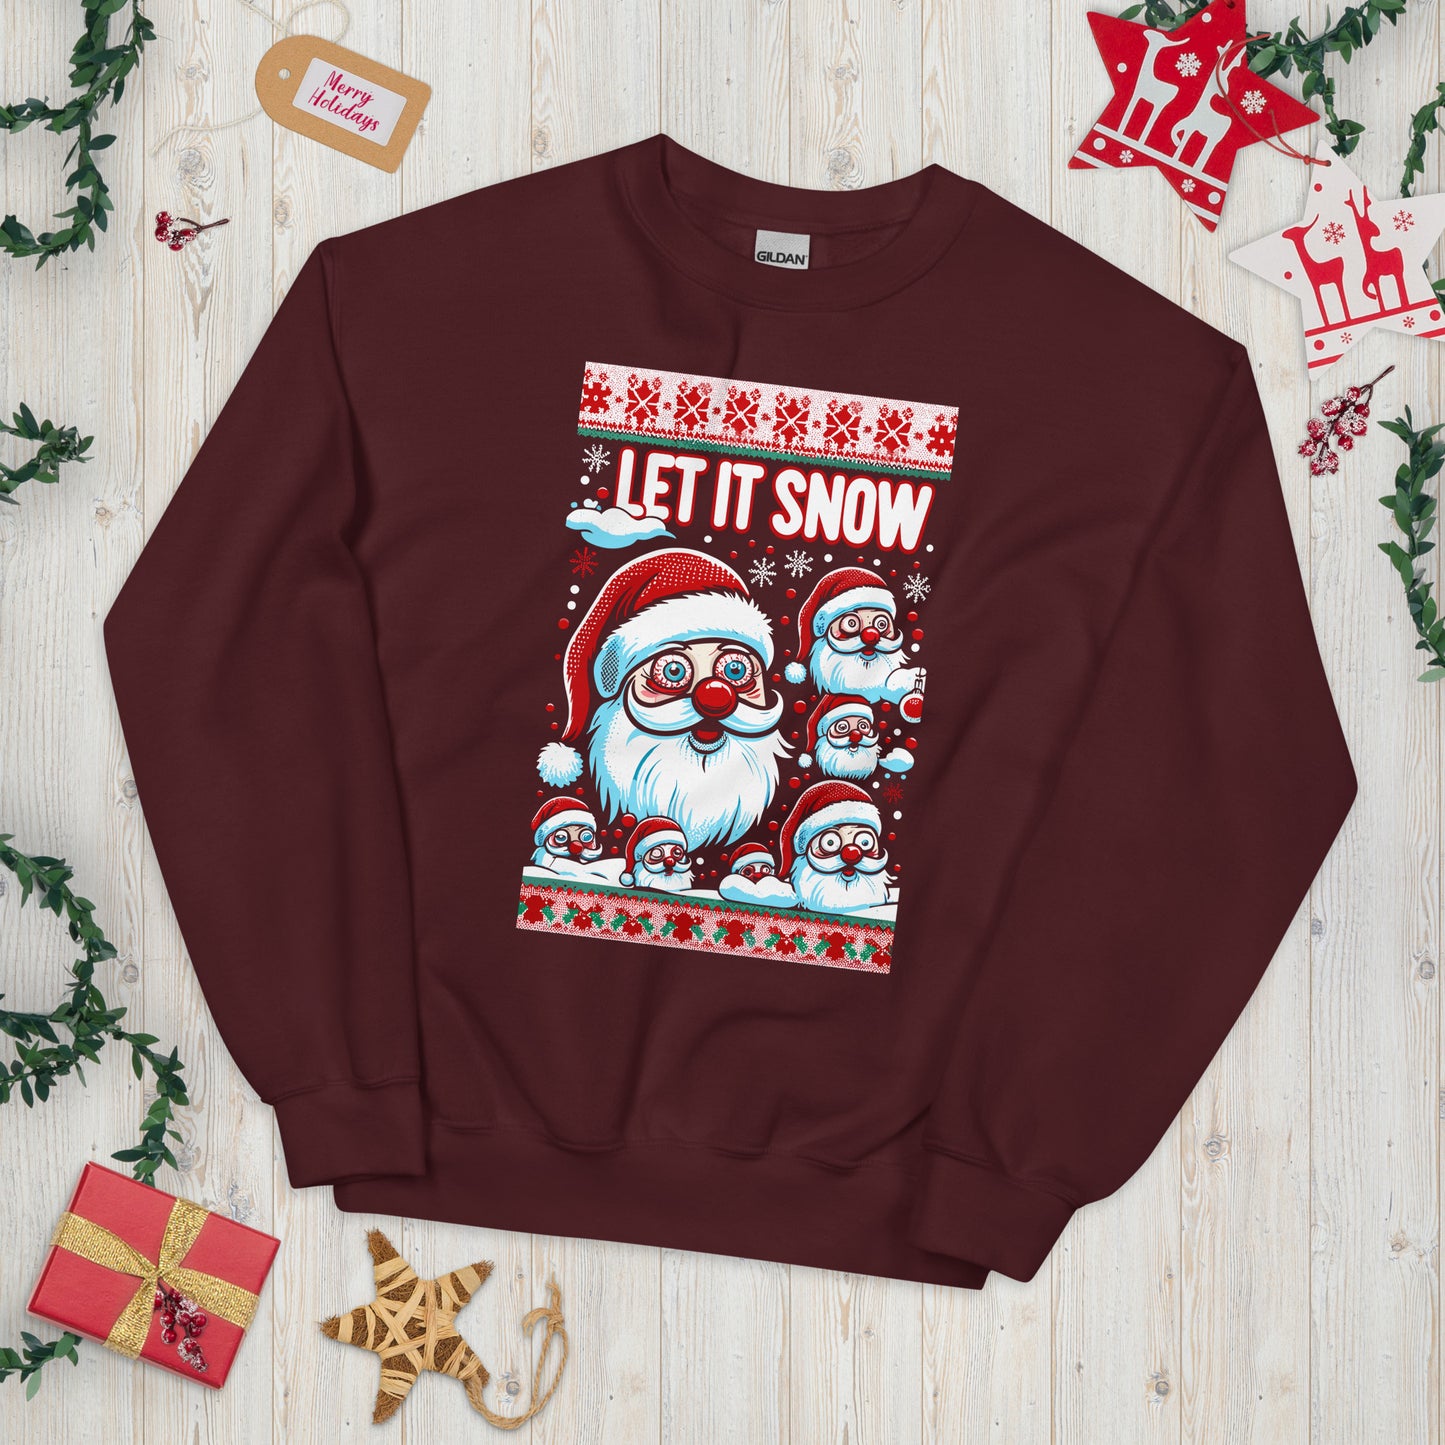 Santa has the crazy eyes, let it snow printed ugly christmas sweater by Whistler Shirts